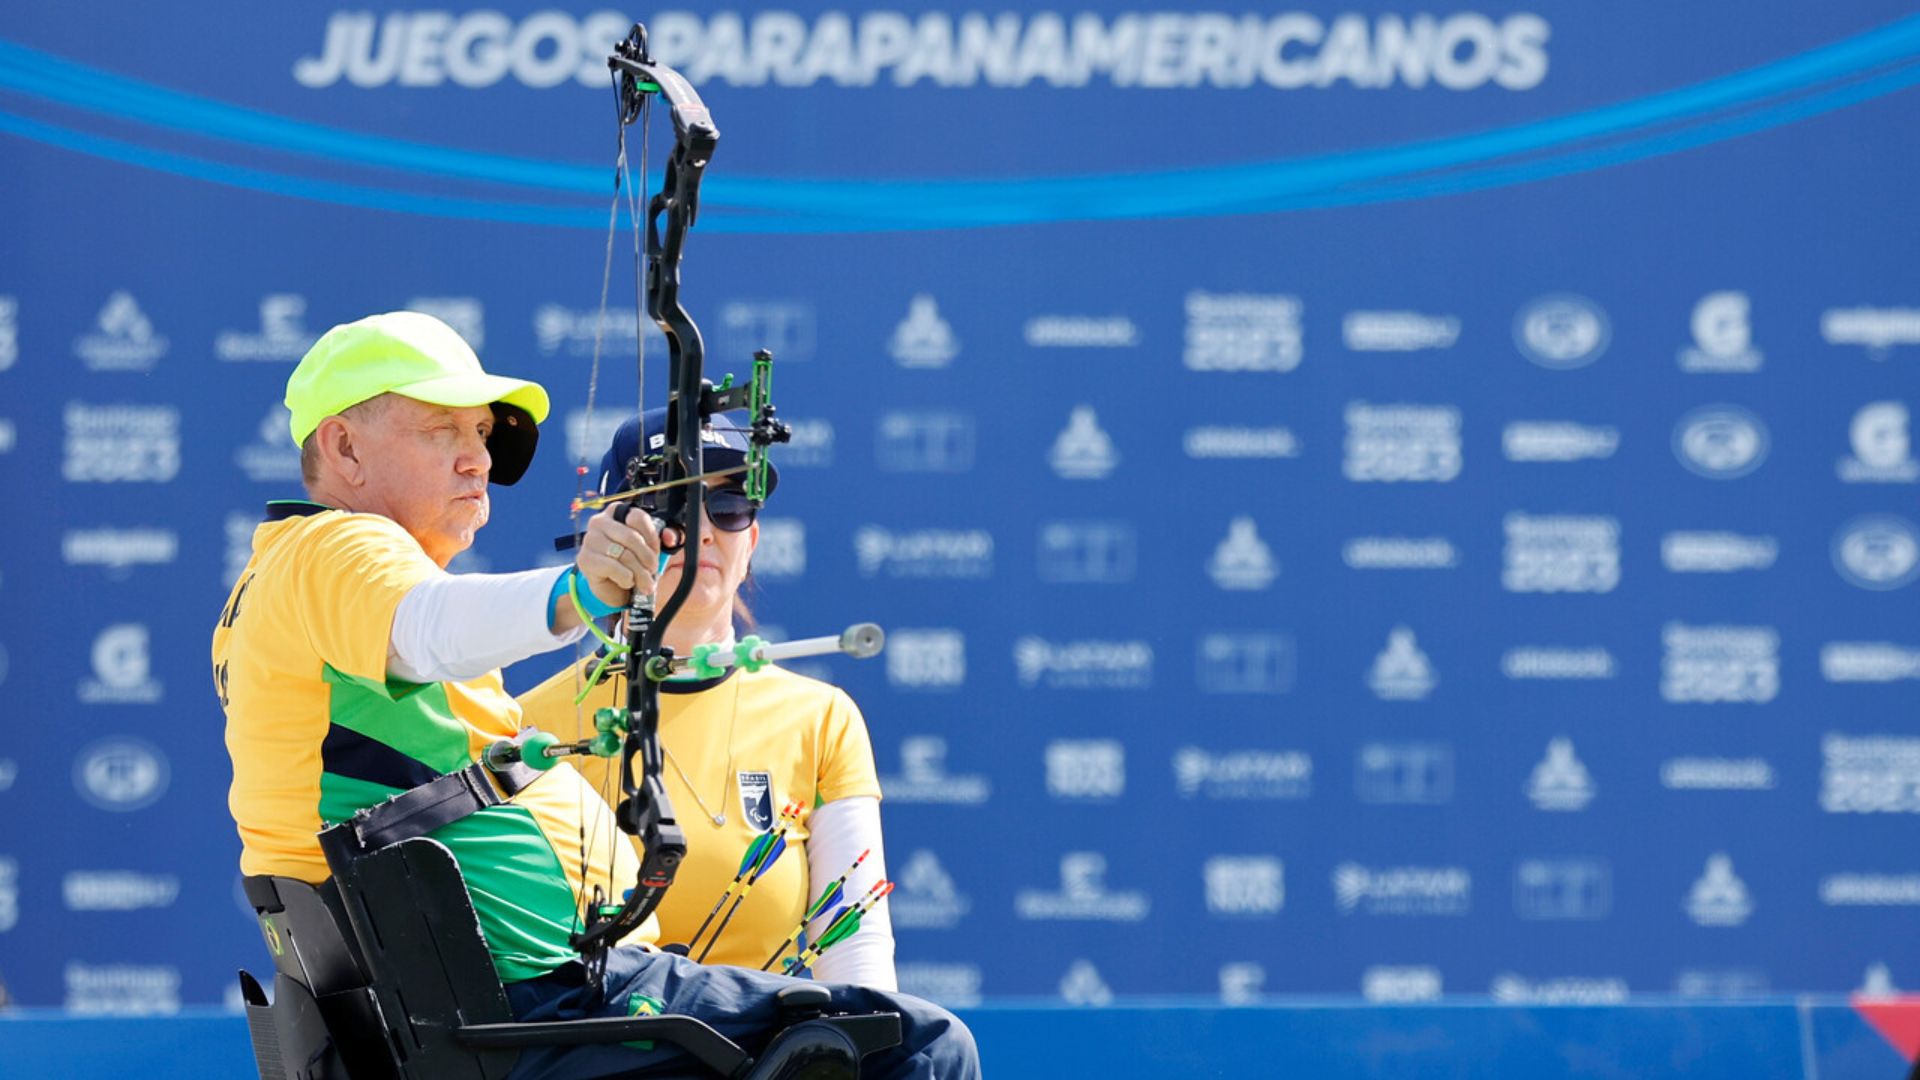 Para Archery: Gold Medal for Brazil in Male's Category